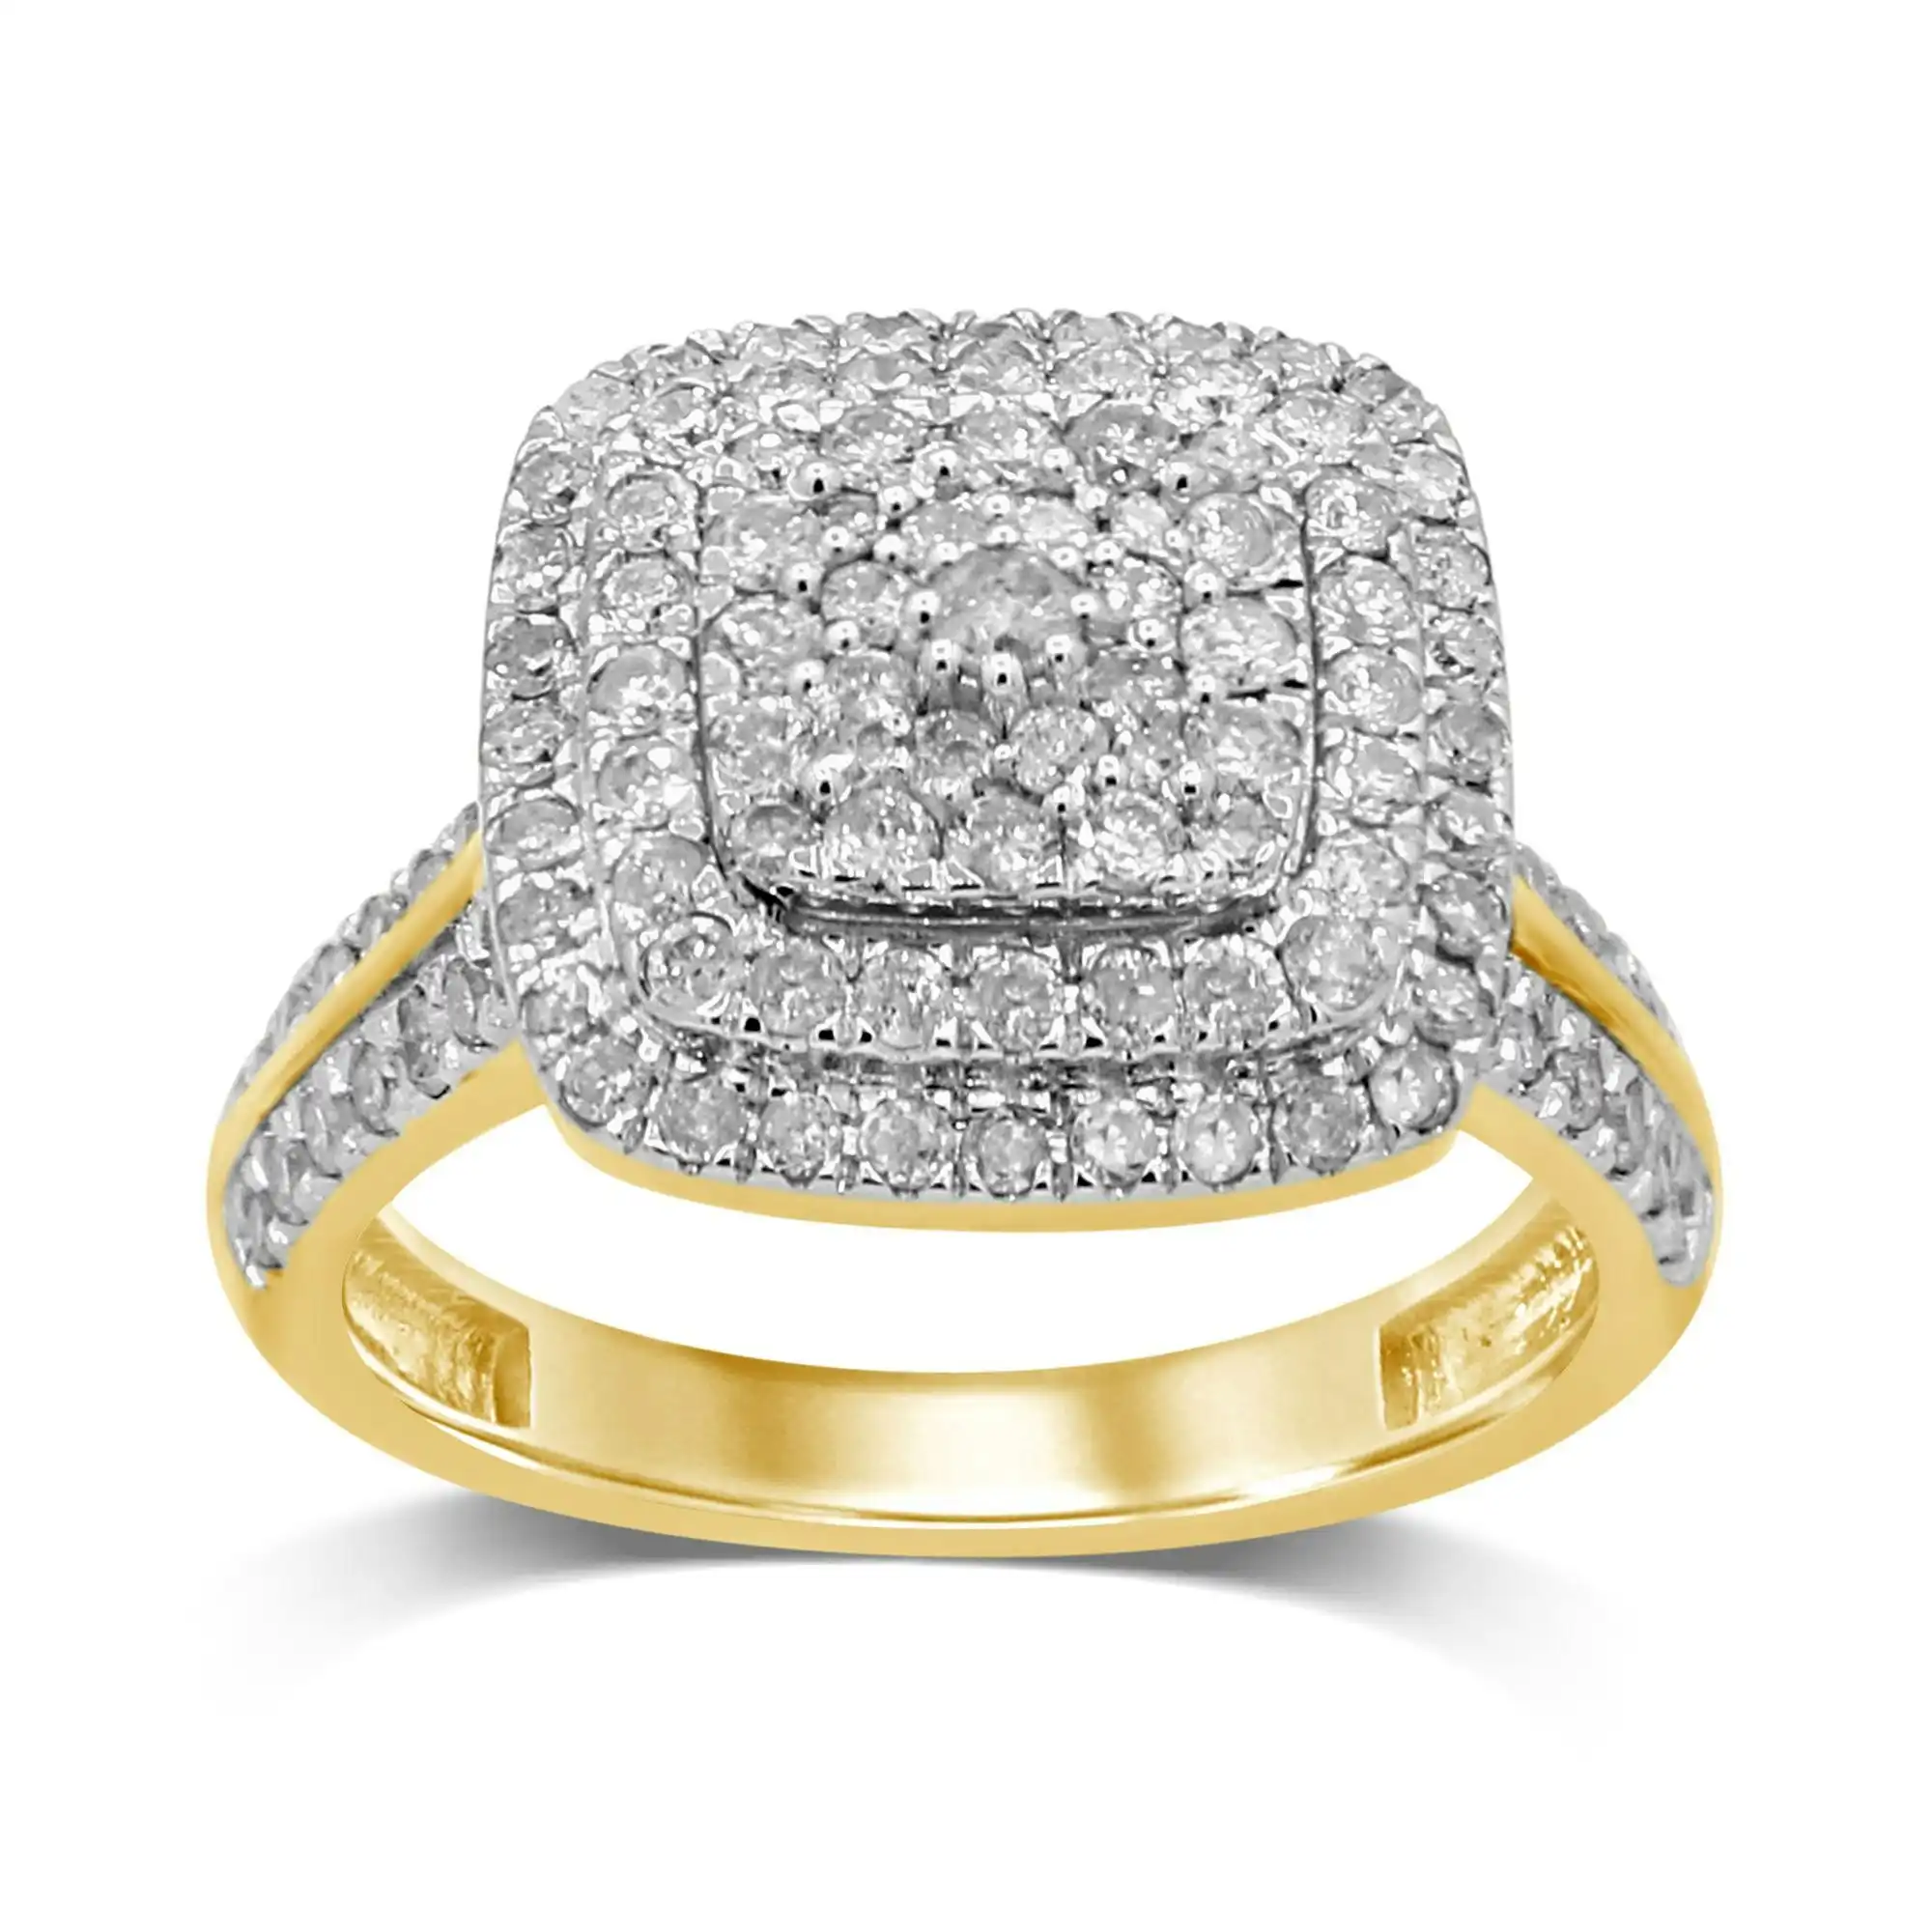 Brilliant Square Look Ring with 1.00ct of Diamonds in 9ct Yellow Gold